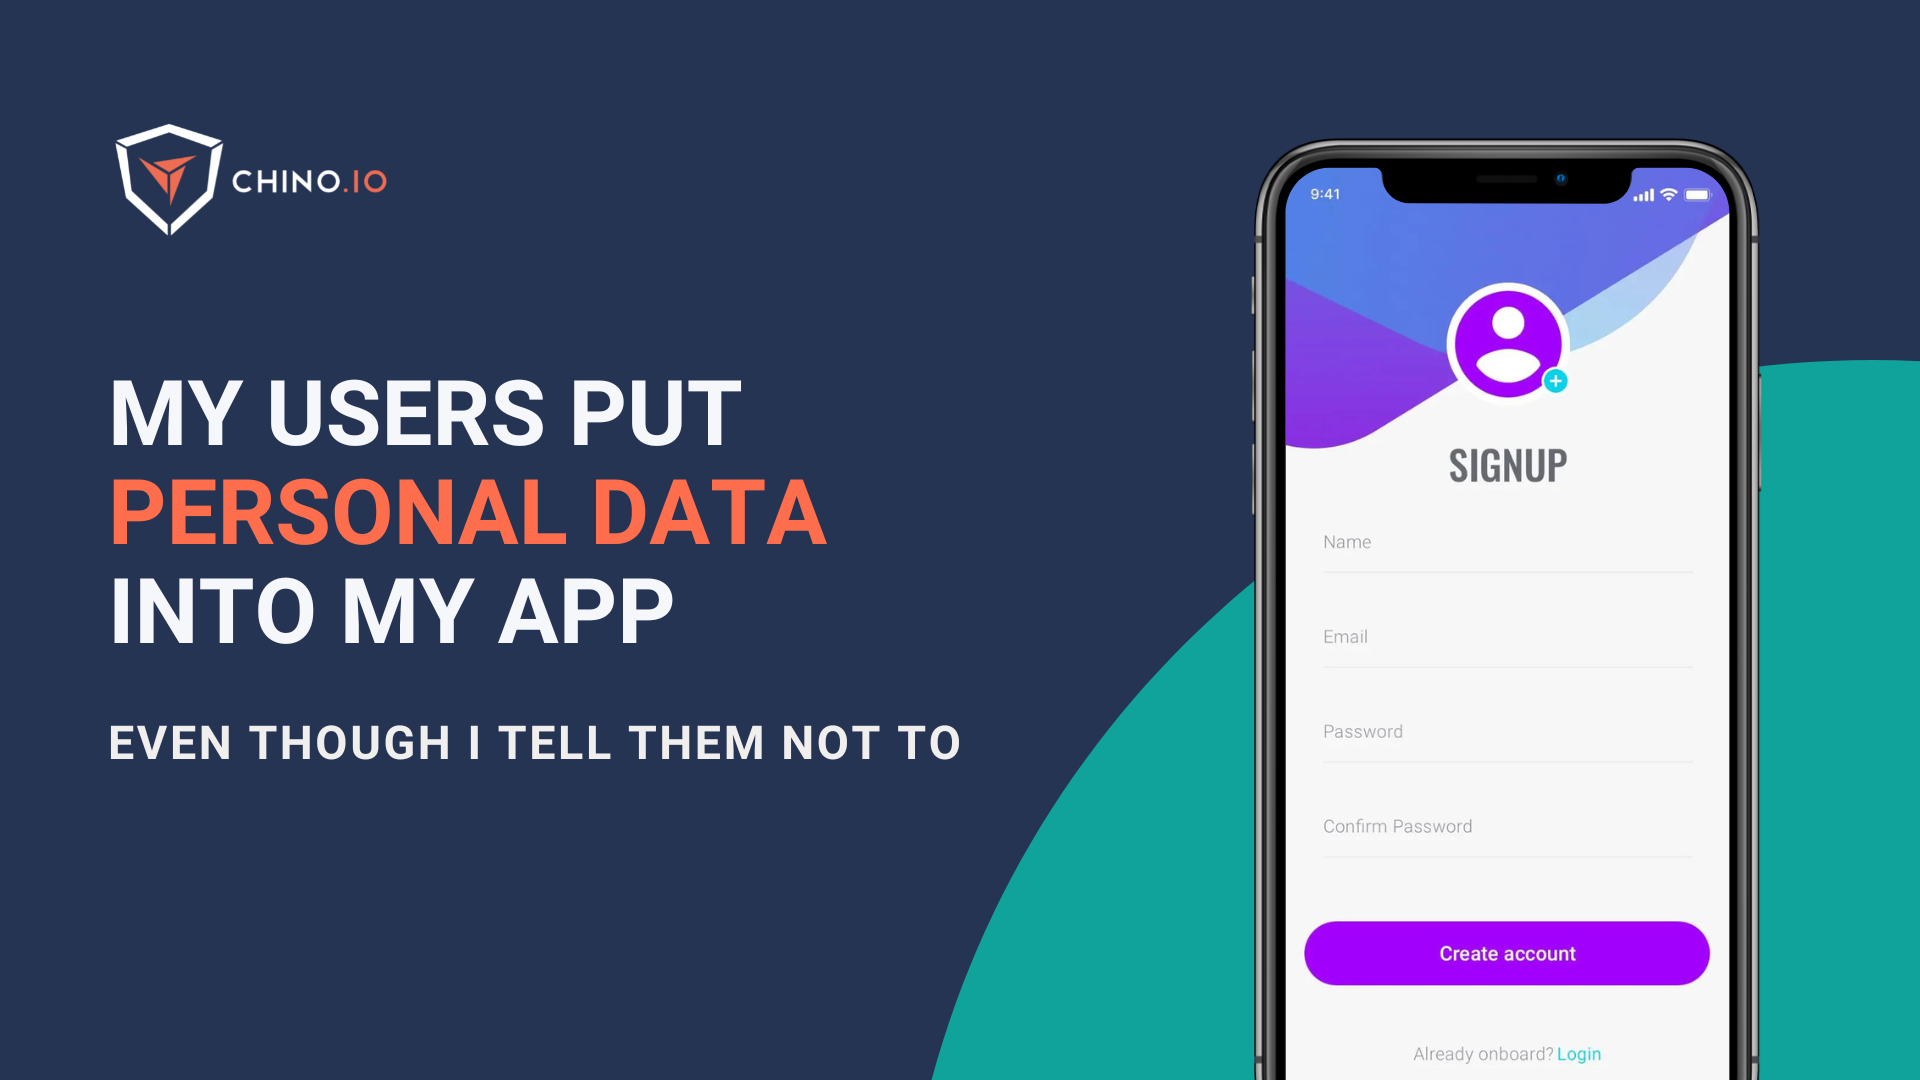 “My users put personal data into my app, even though I tell them not to”